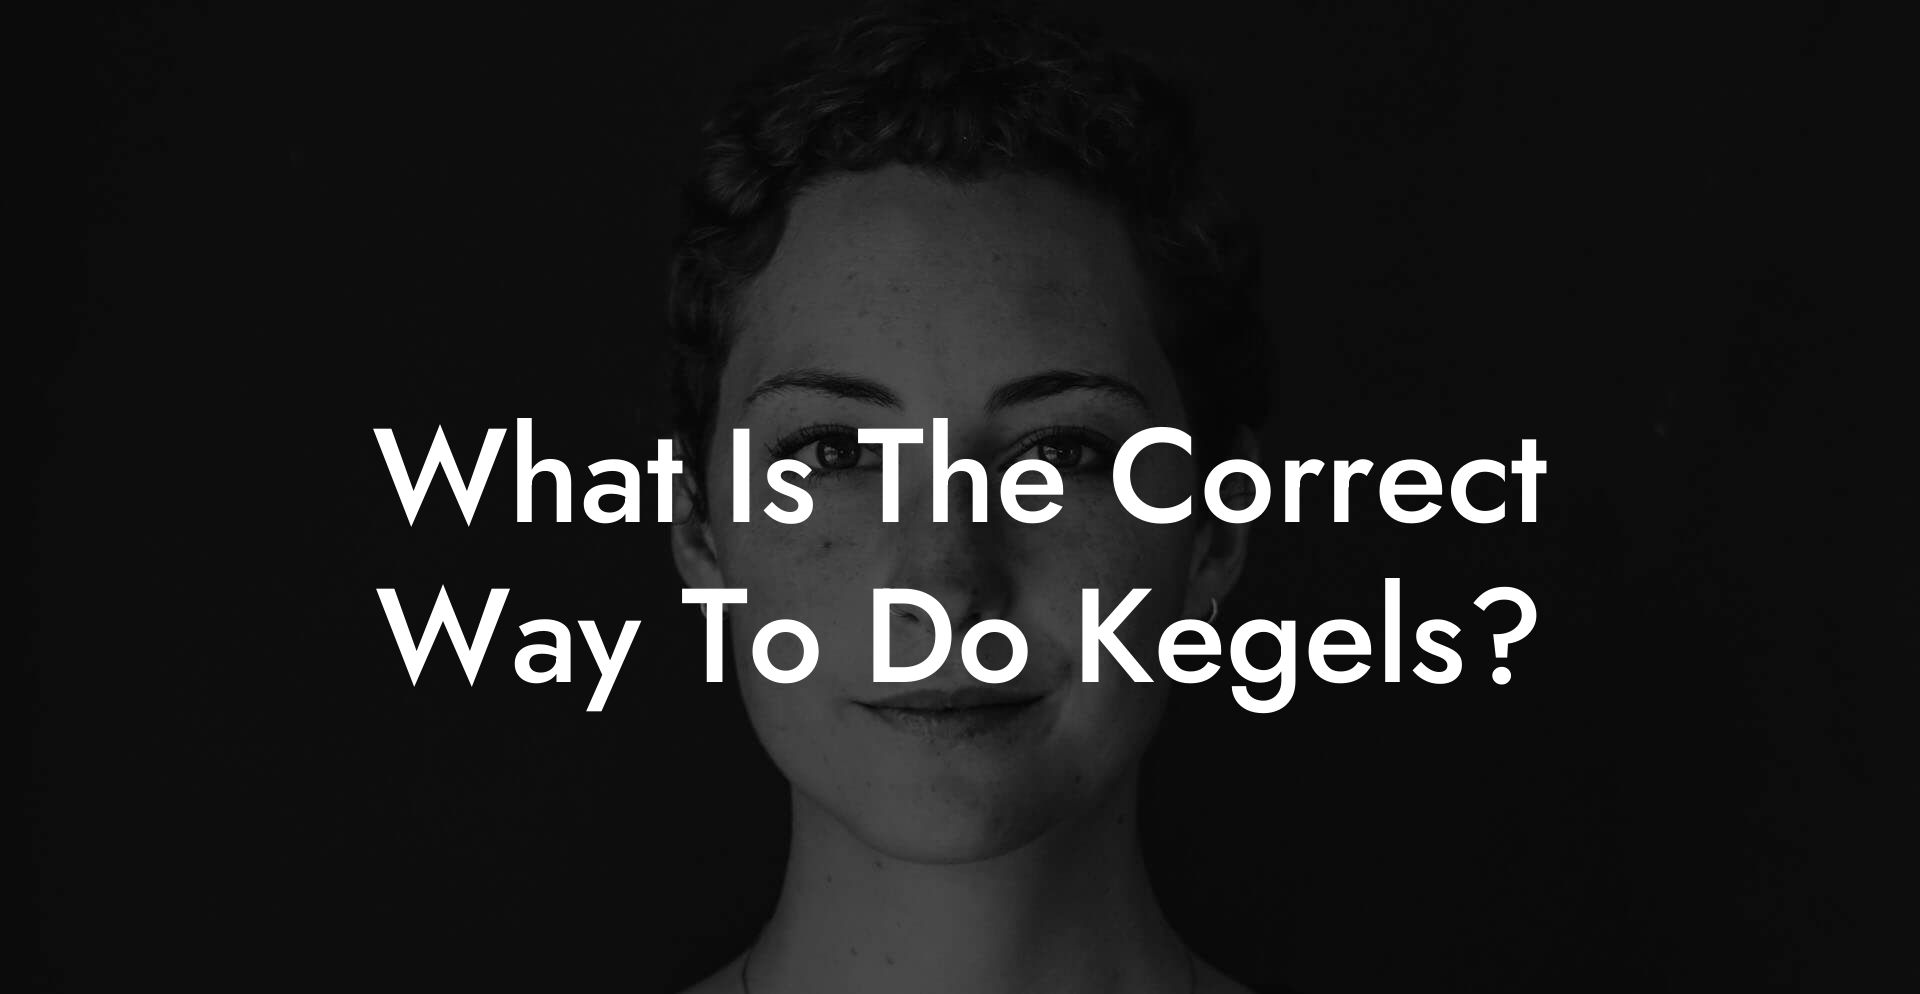 What Is The Correct Way To Do Kegels?